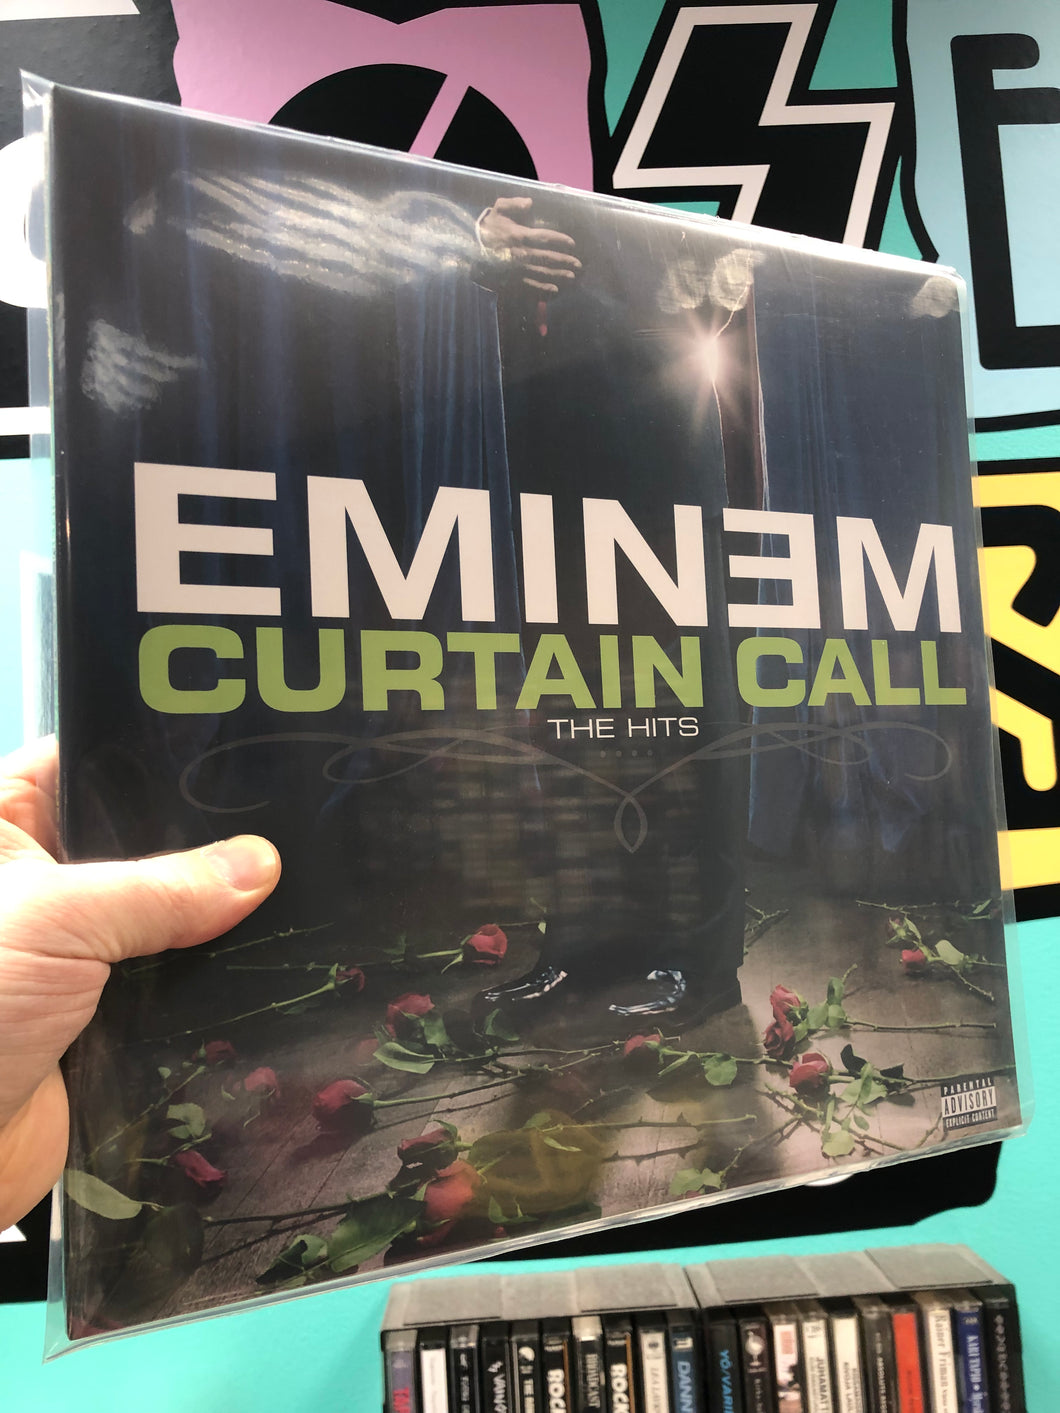 Eminem: Curtain Call - The Hits, reissue, Europe 2021